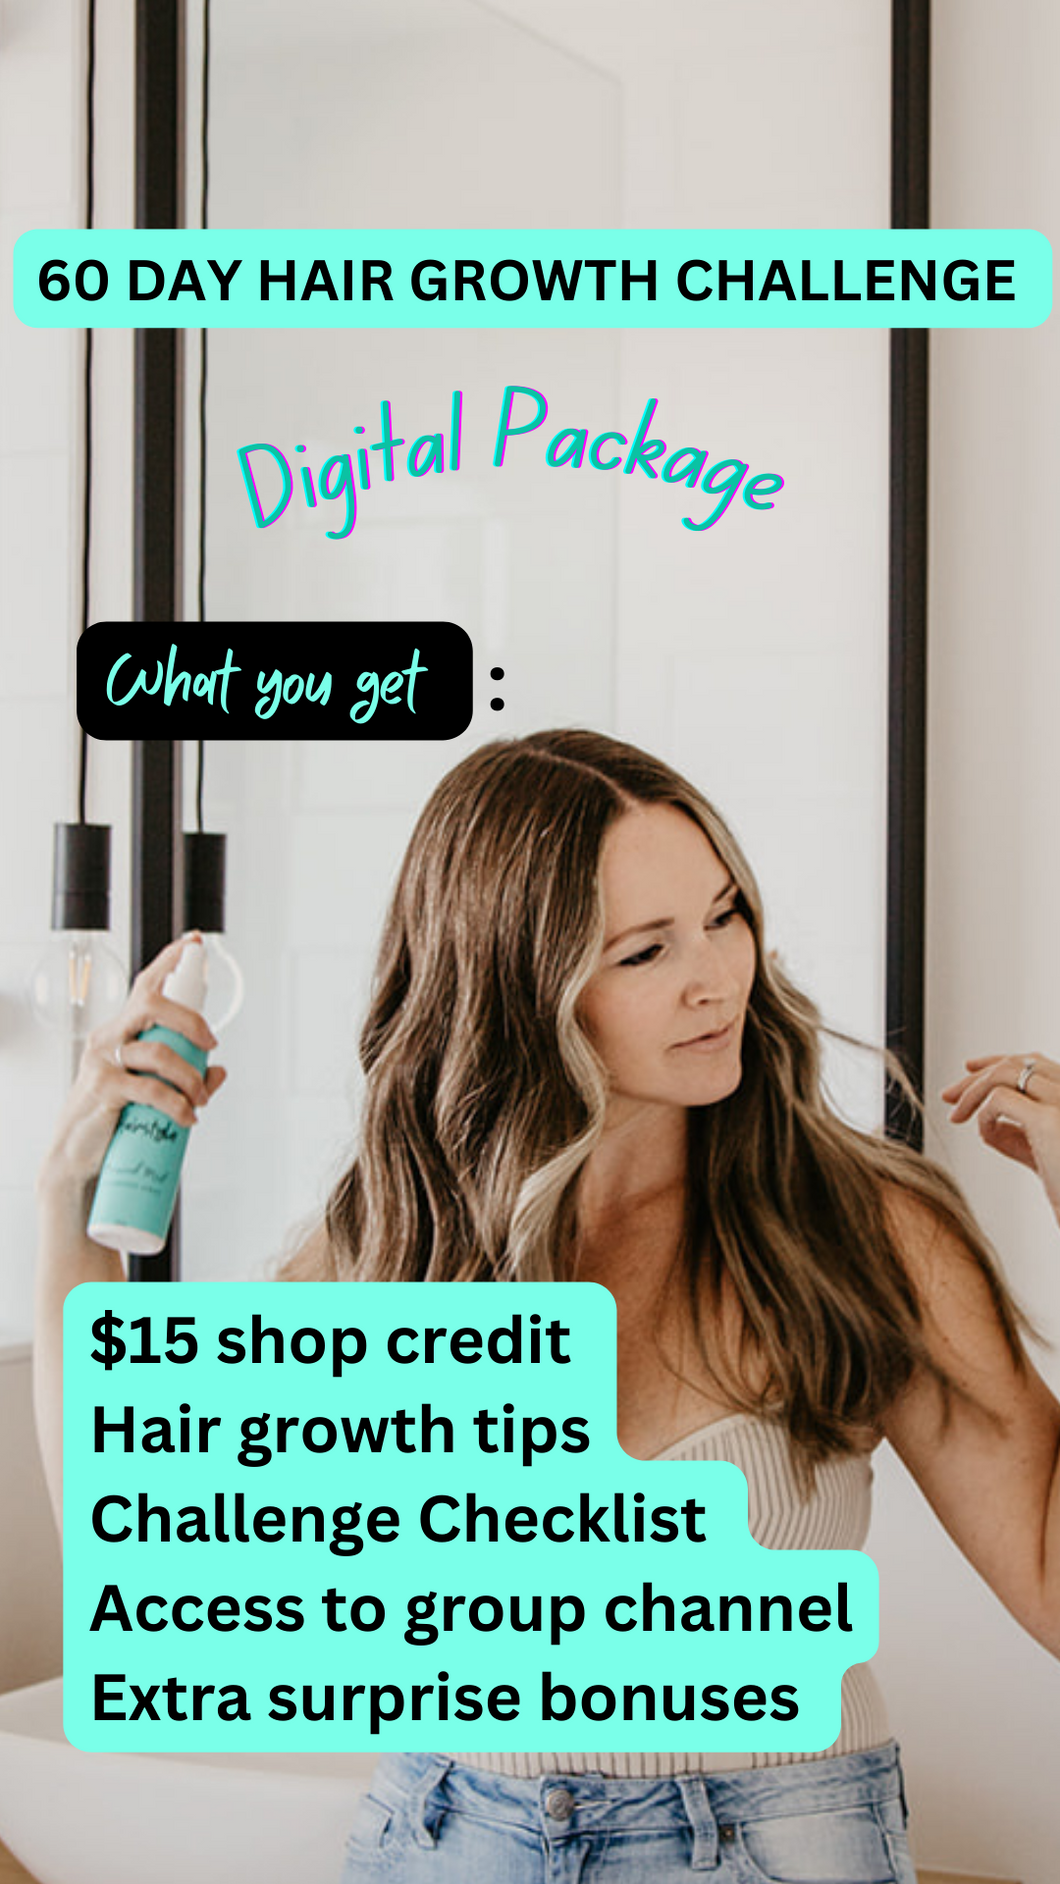 60 Day Hair Growth Challenge (Digital Package)